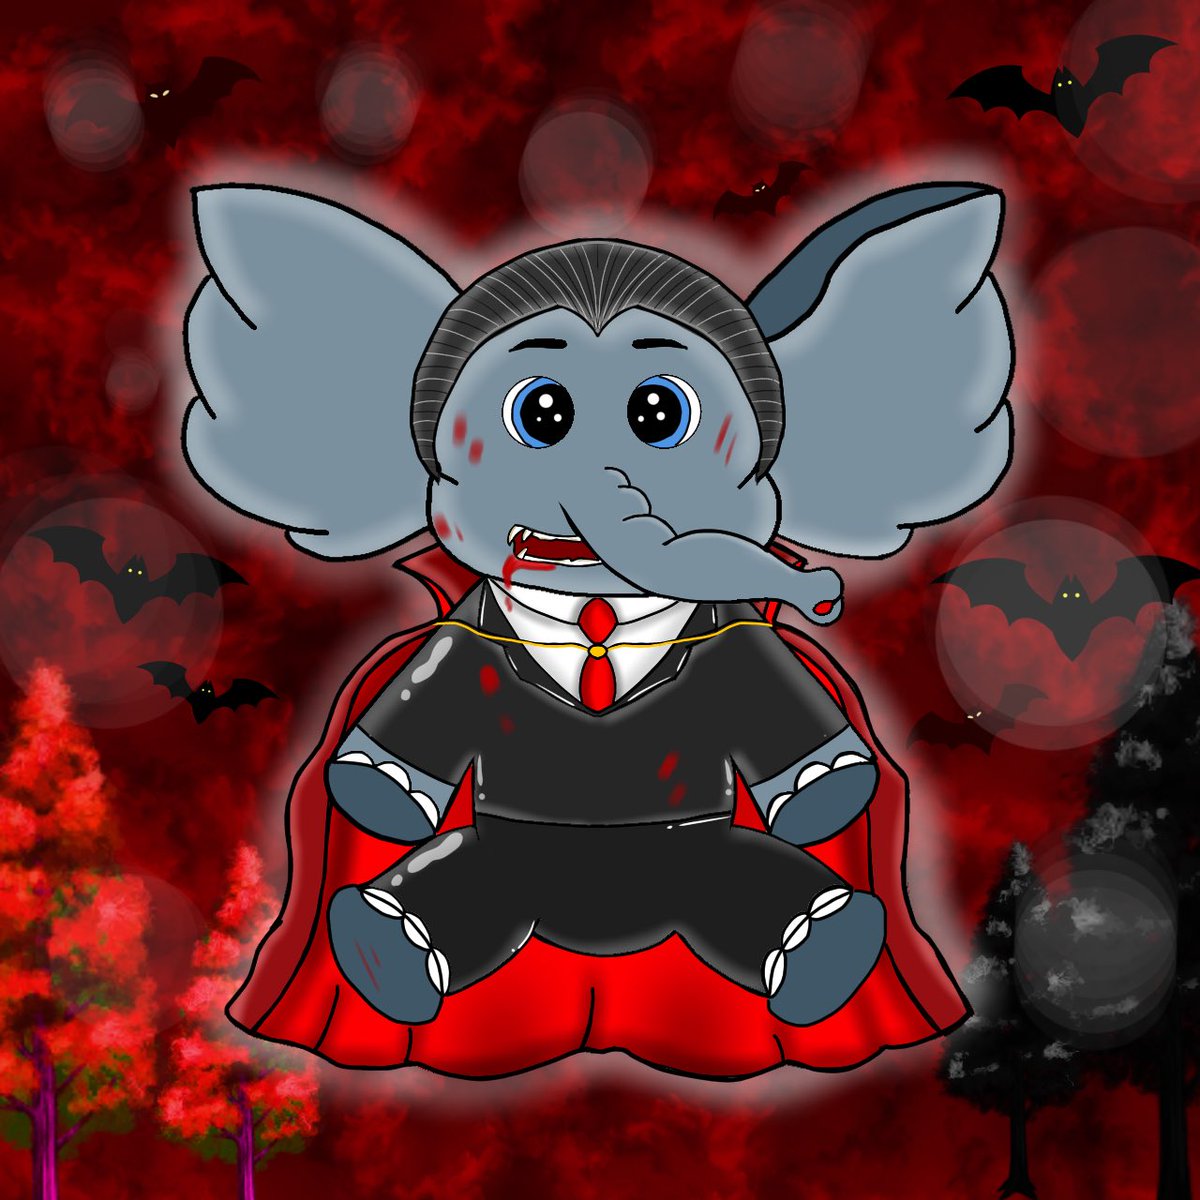 🧛‍♀️ NEW DROP 🧛‍♀️ Vampire #125 Baby Elephant is now available on opensea !!! Share me your thoughts as always fam 🔥 I love him !! Let’s grab him fast !! 🔥🔥🔥 opensea.io/assets/matic/0… #StylishBabyElephants